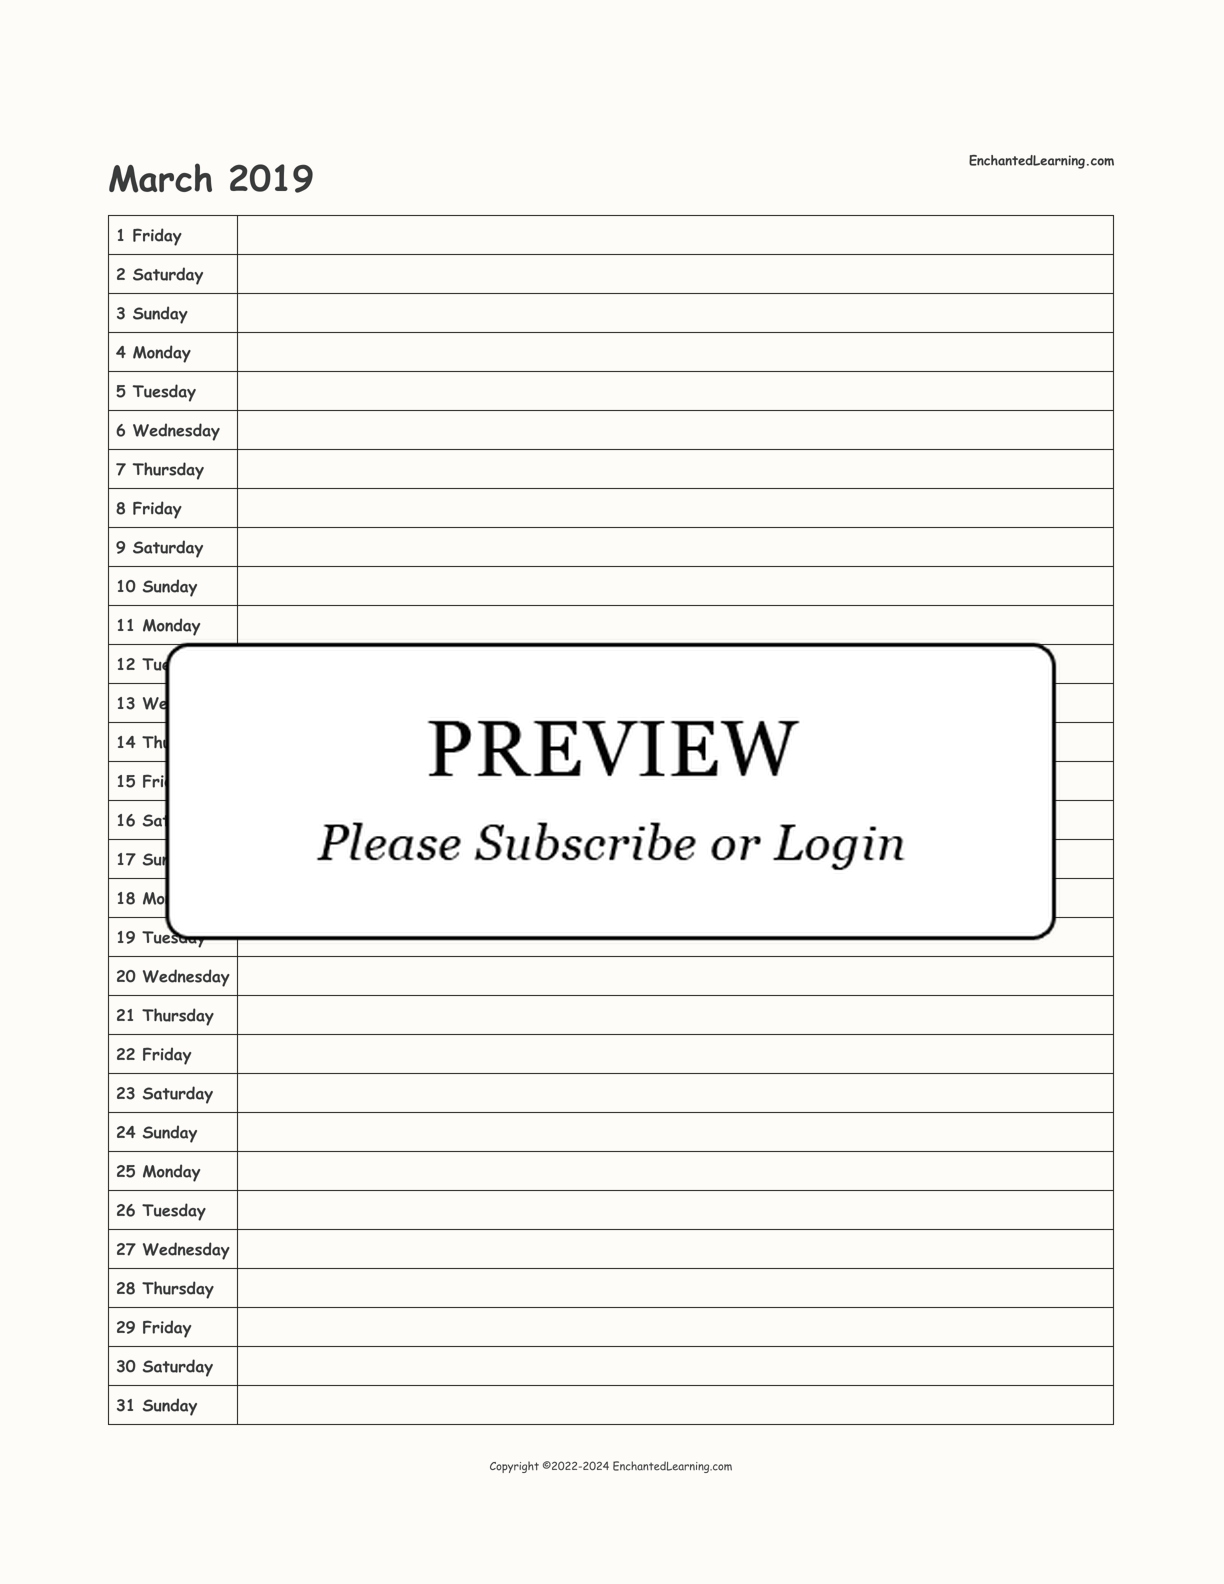 2019 Scheduling Calendar interactive printout page 3